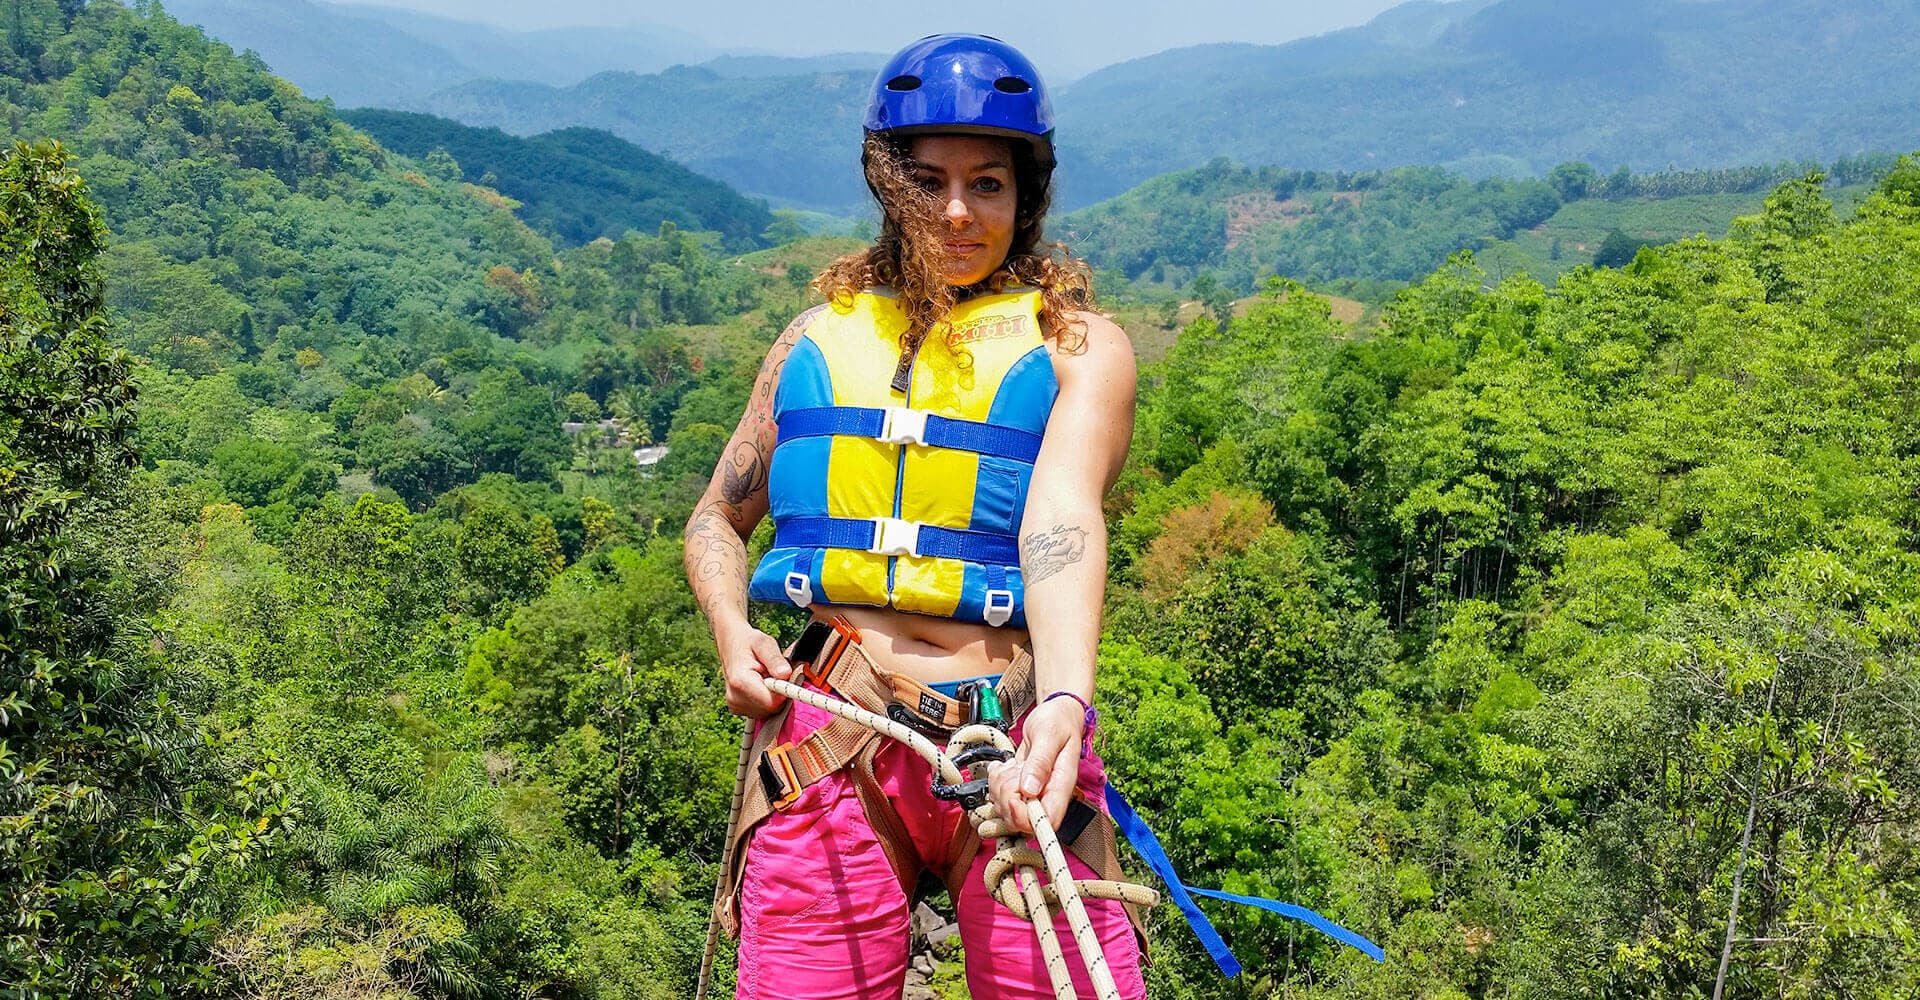 A young girl abseiling in beautiful nature in Kithulgala area in Sri Lanka